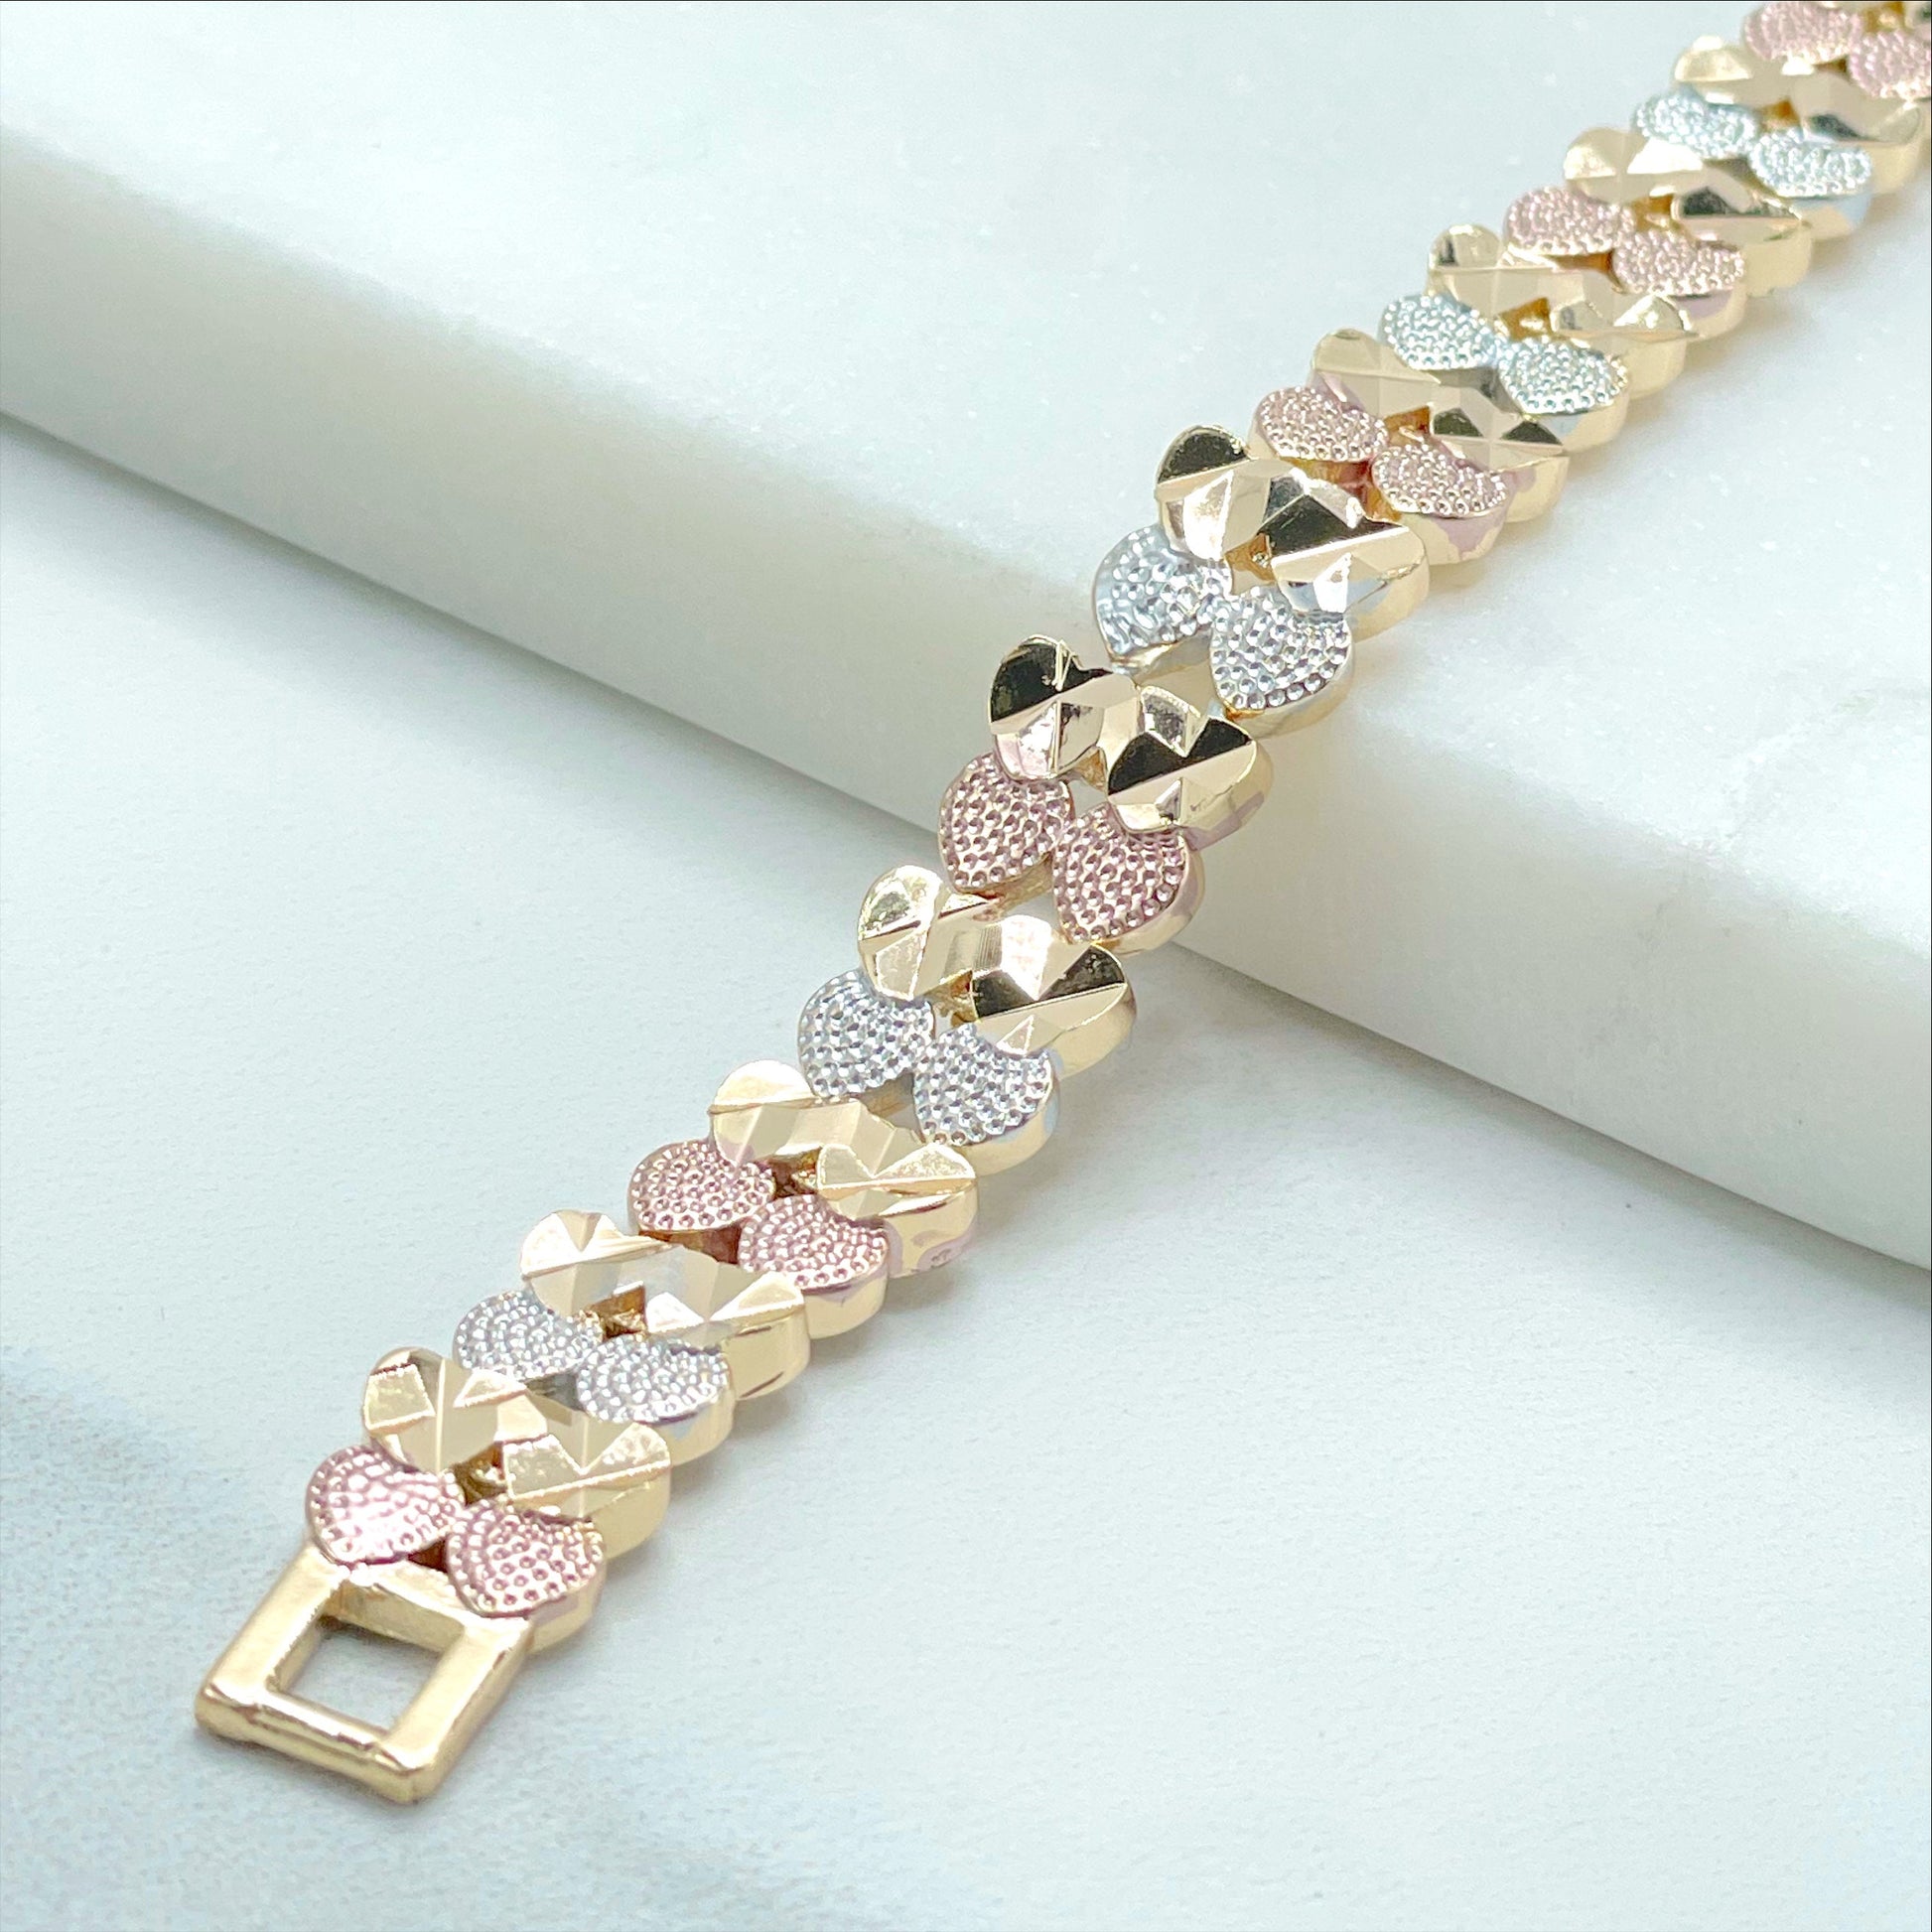 18k Gold Filled Three Tone Texturized Hearts 8 inches Bracelet Wholesale Jewelry Making Supplies